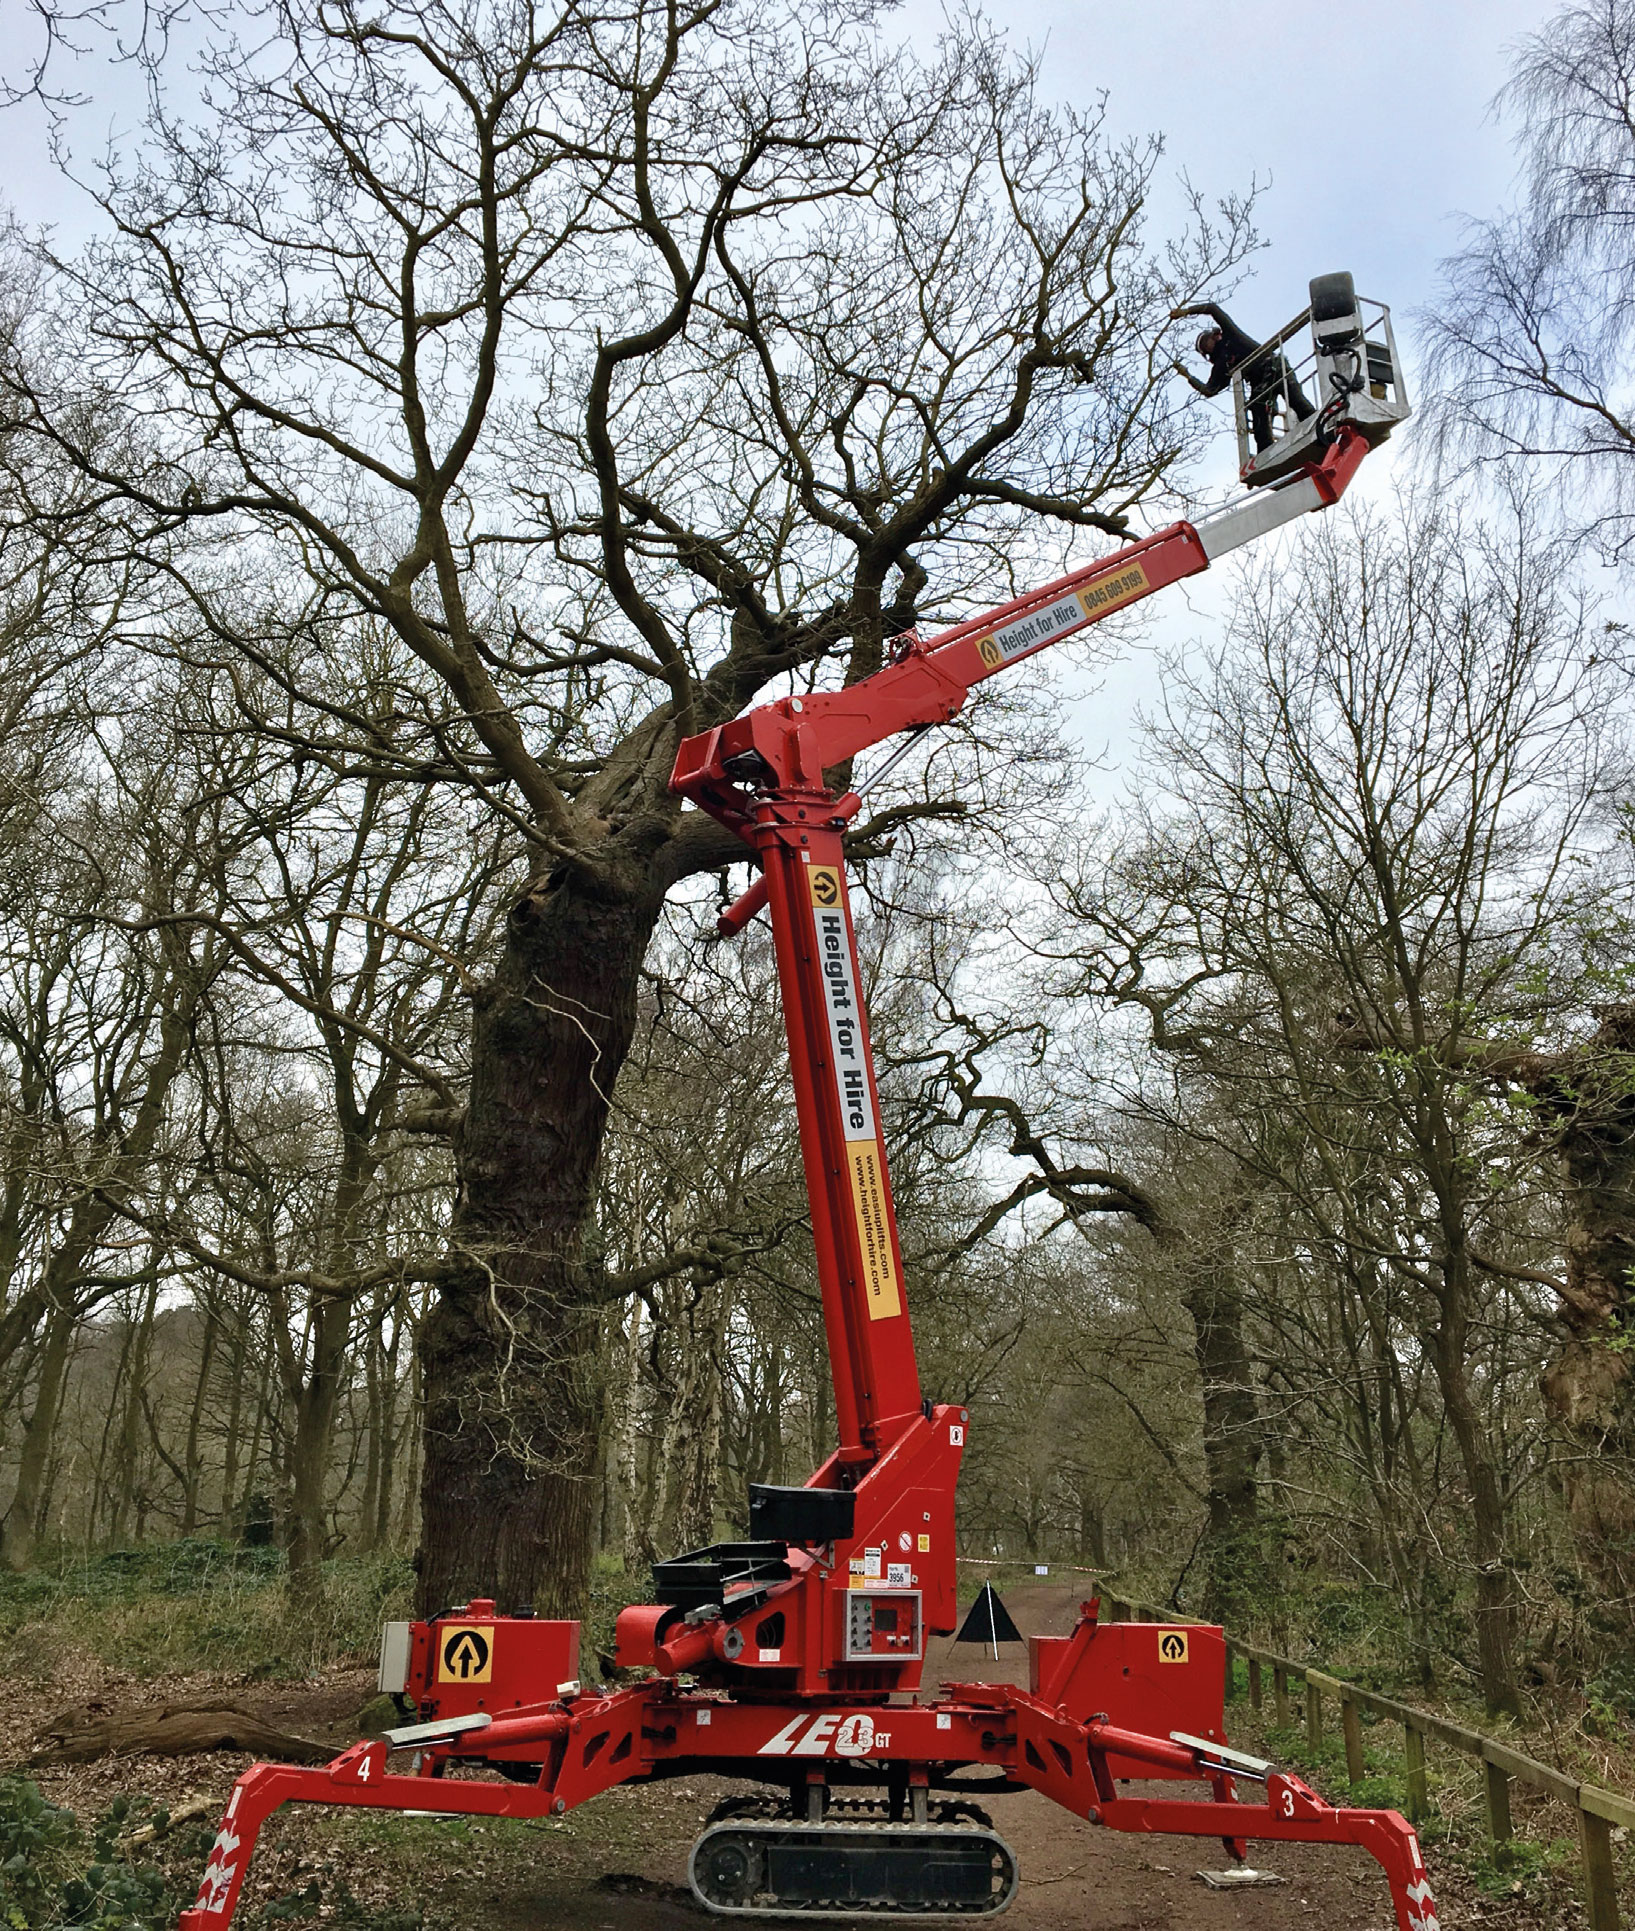 Using the reduction via thinning technique at Sherwood Forest. Perhaps an option instead of retrenchment pruning?